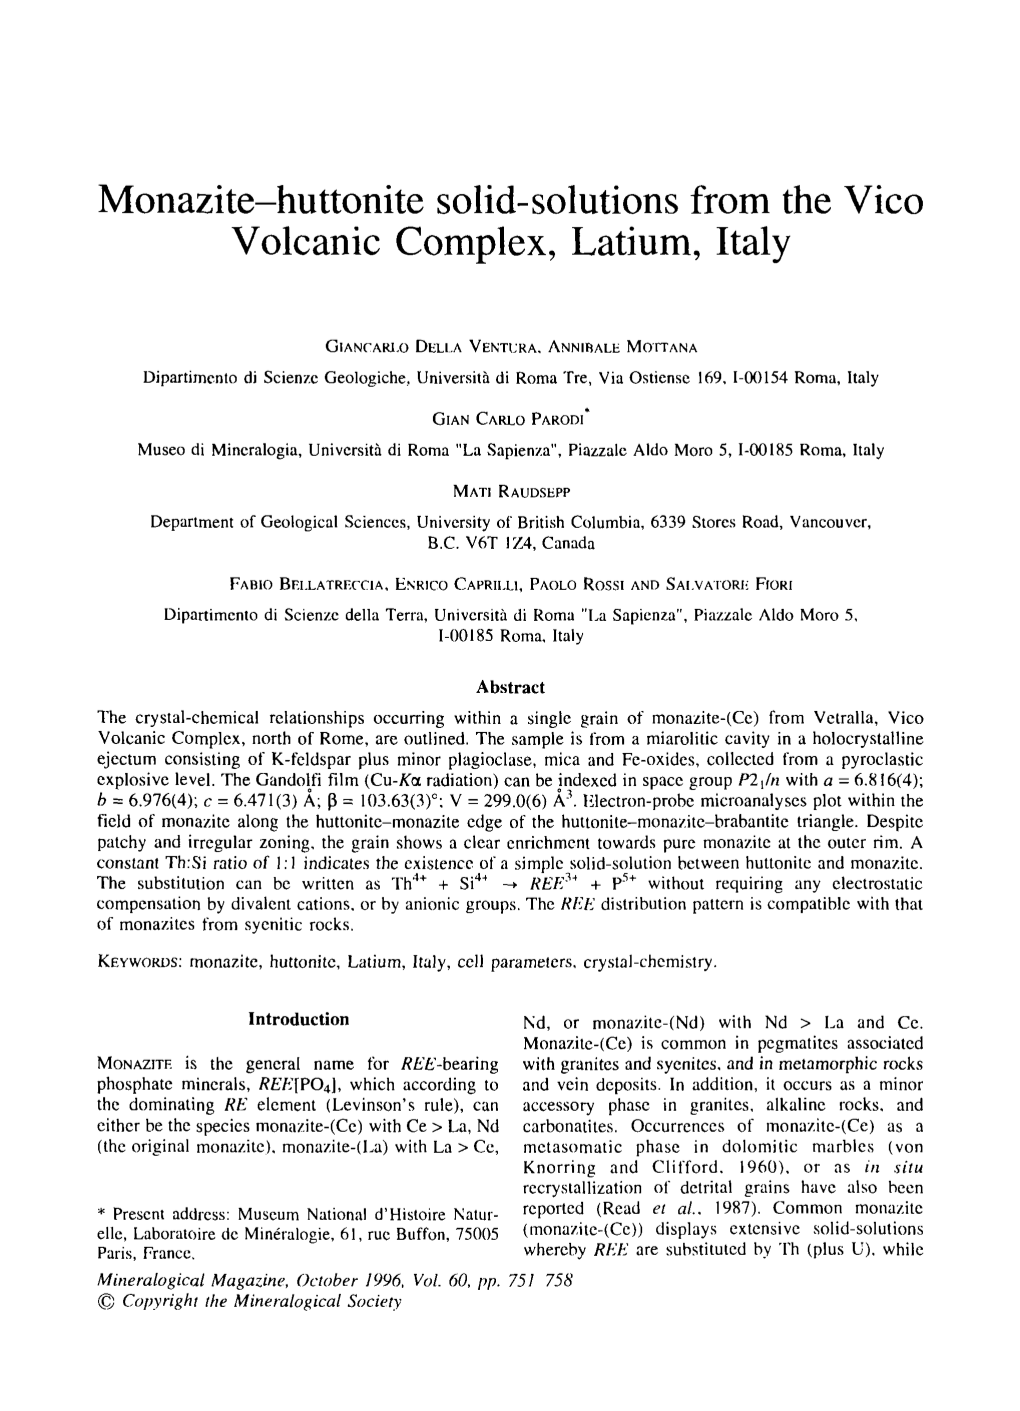 Monazite-Huttonite Solid-Solutions from the Vico Volcanic Complex, Latium, Italy